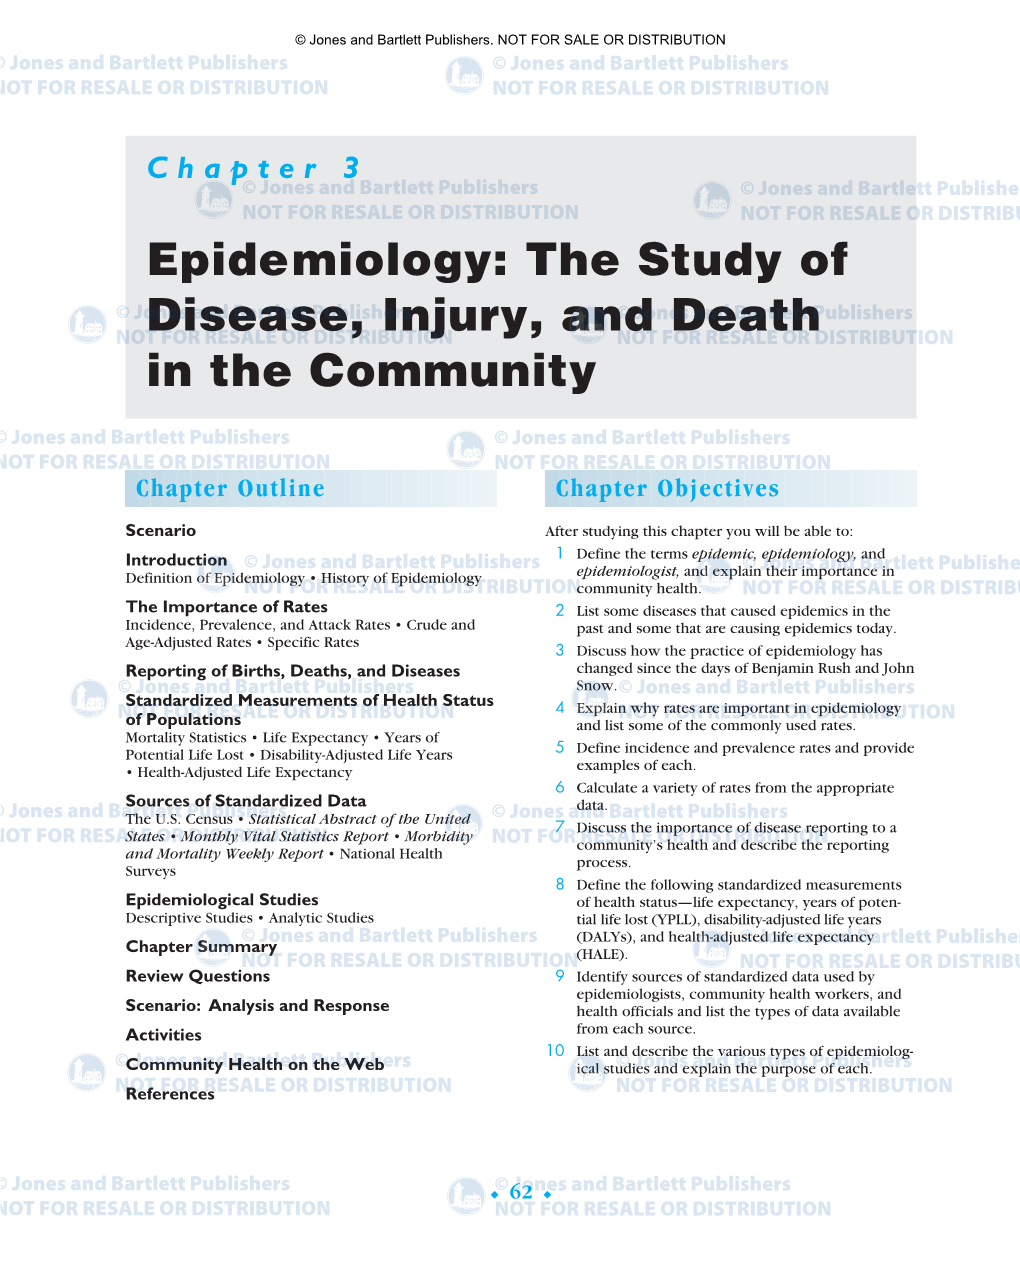 Epidemiology: the Study of Disease, Injury, and Death in the Community